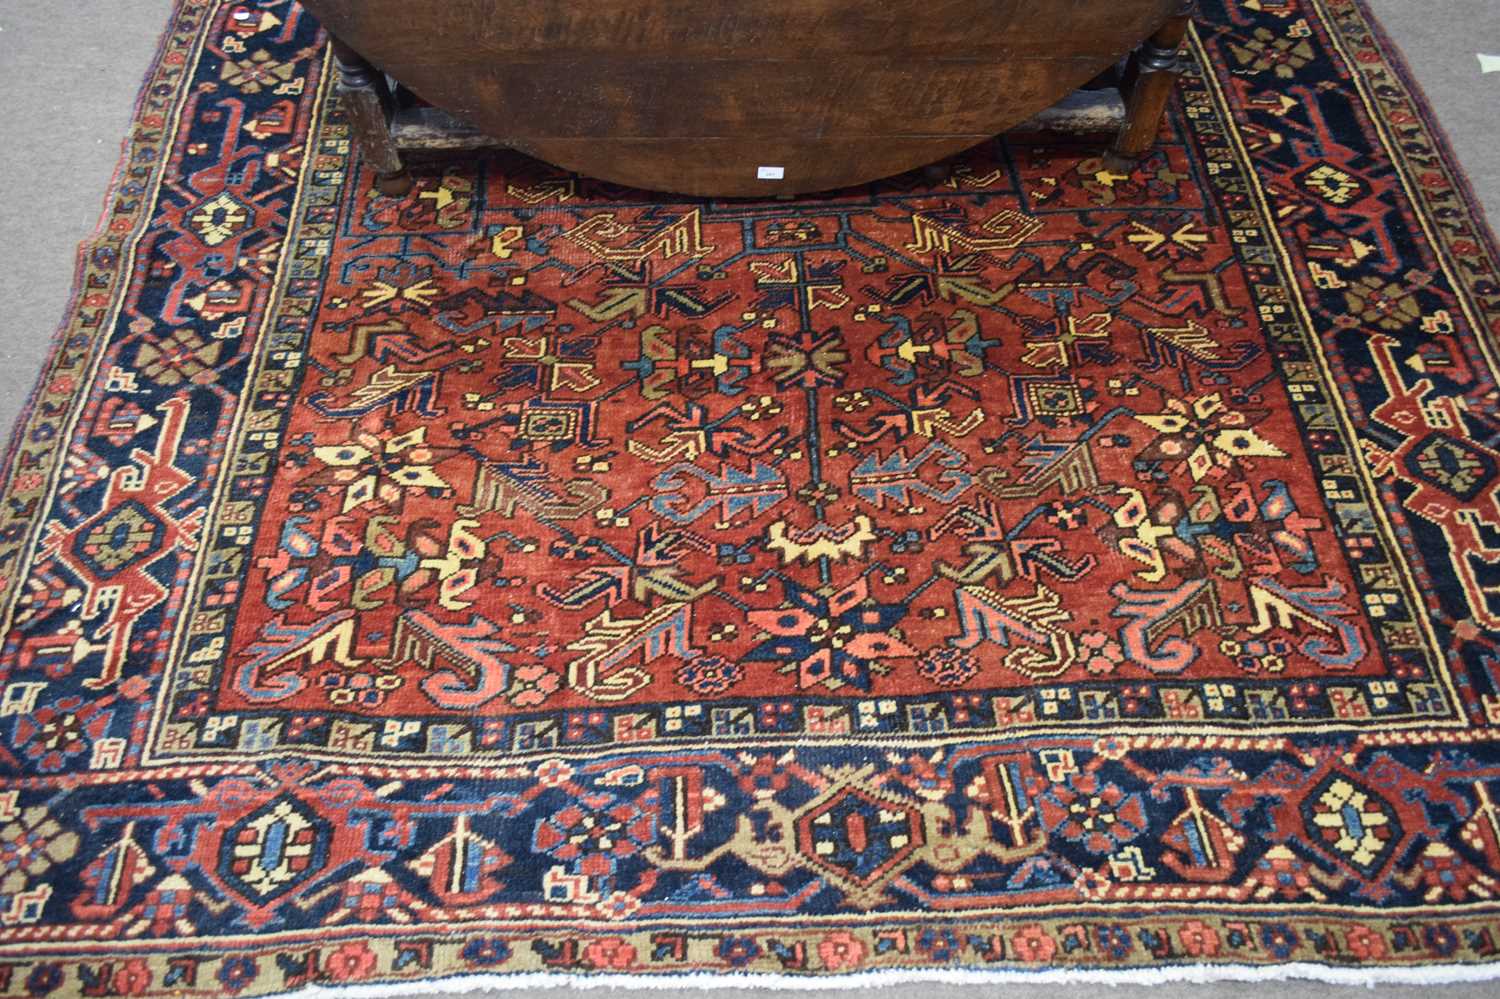 20th century Heriz wool floor rug decorated with stylised floral and geometric design on a